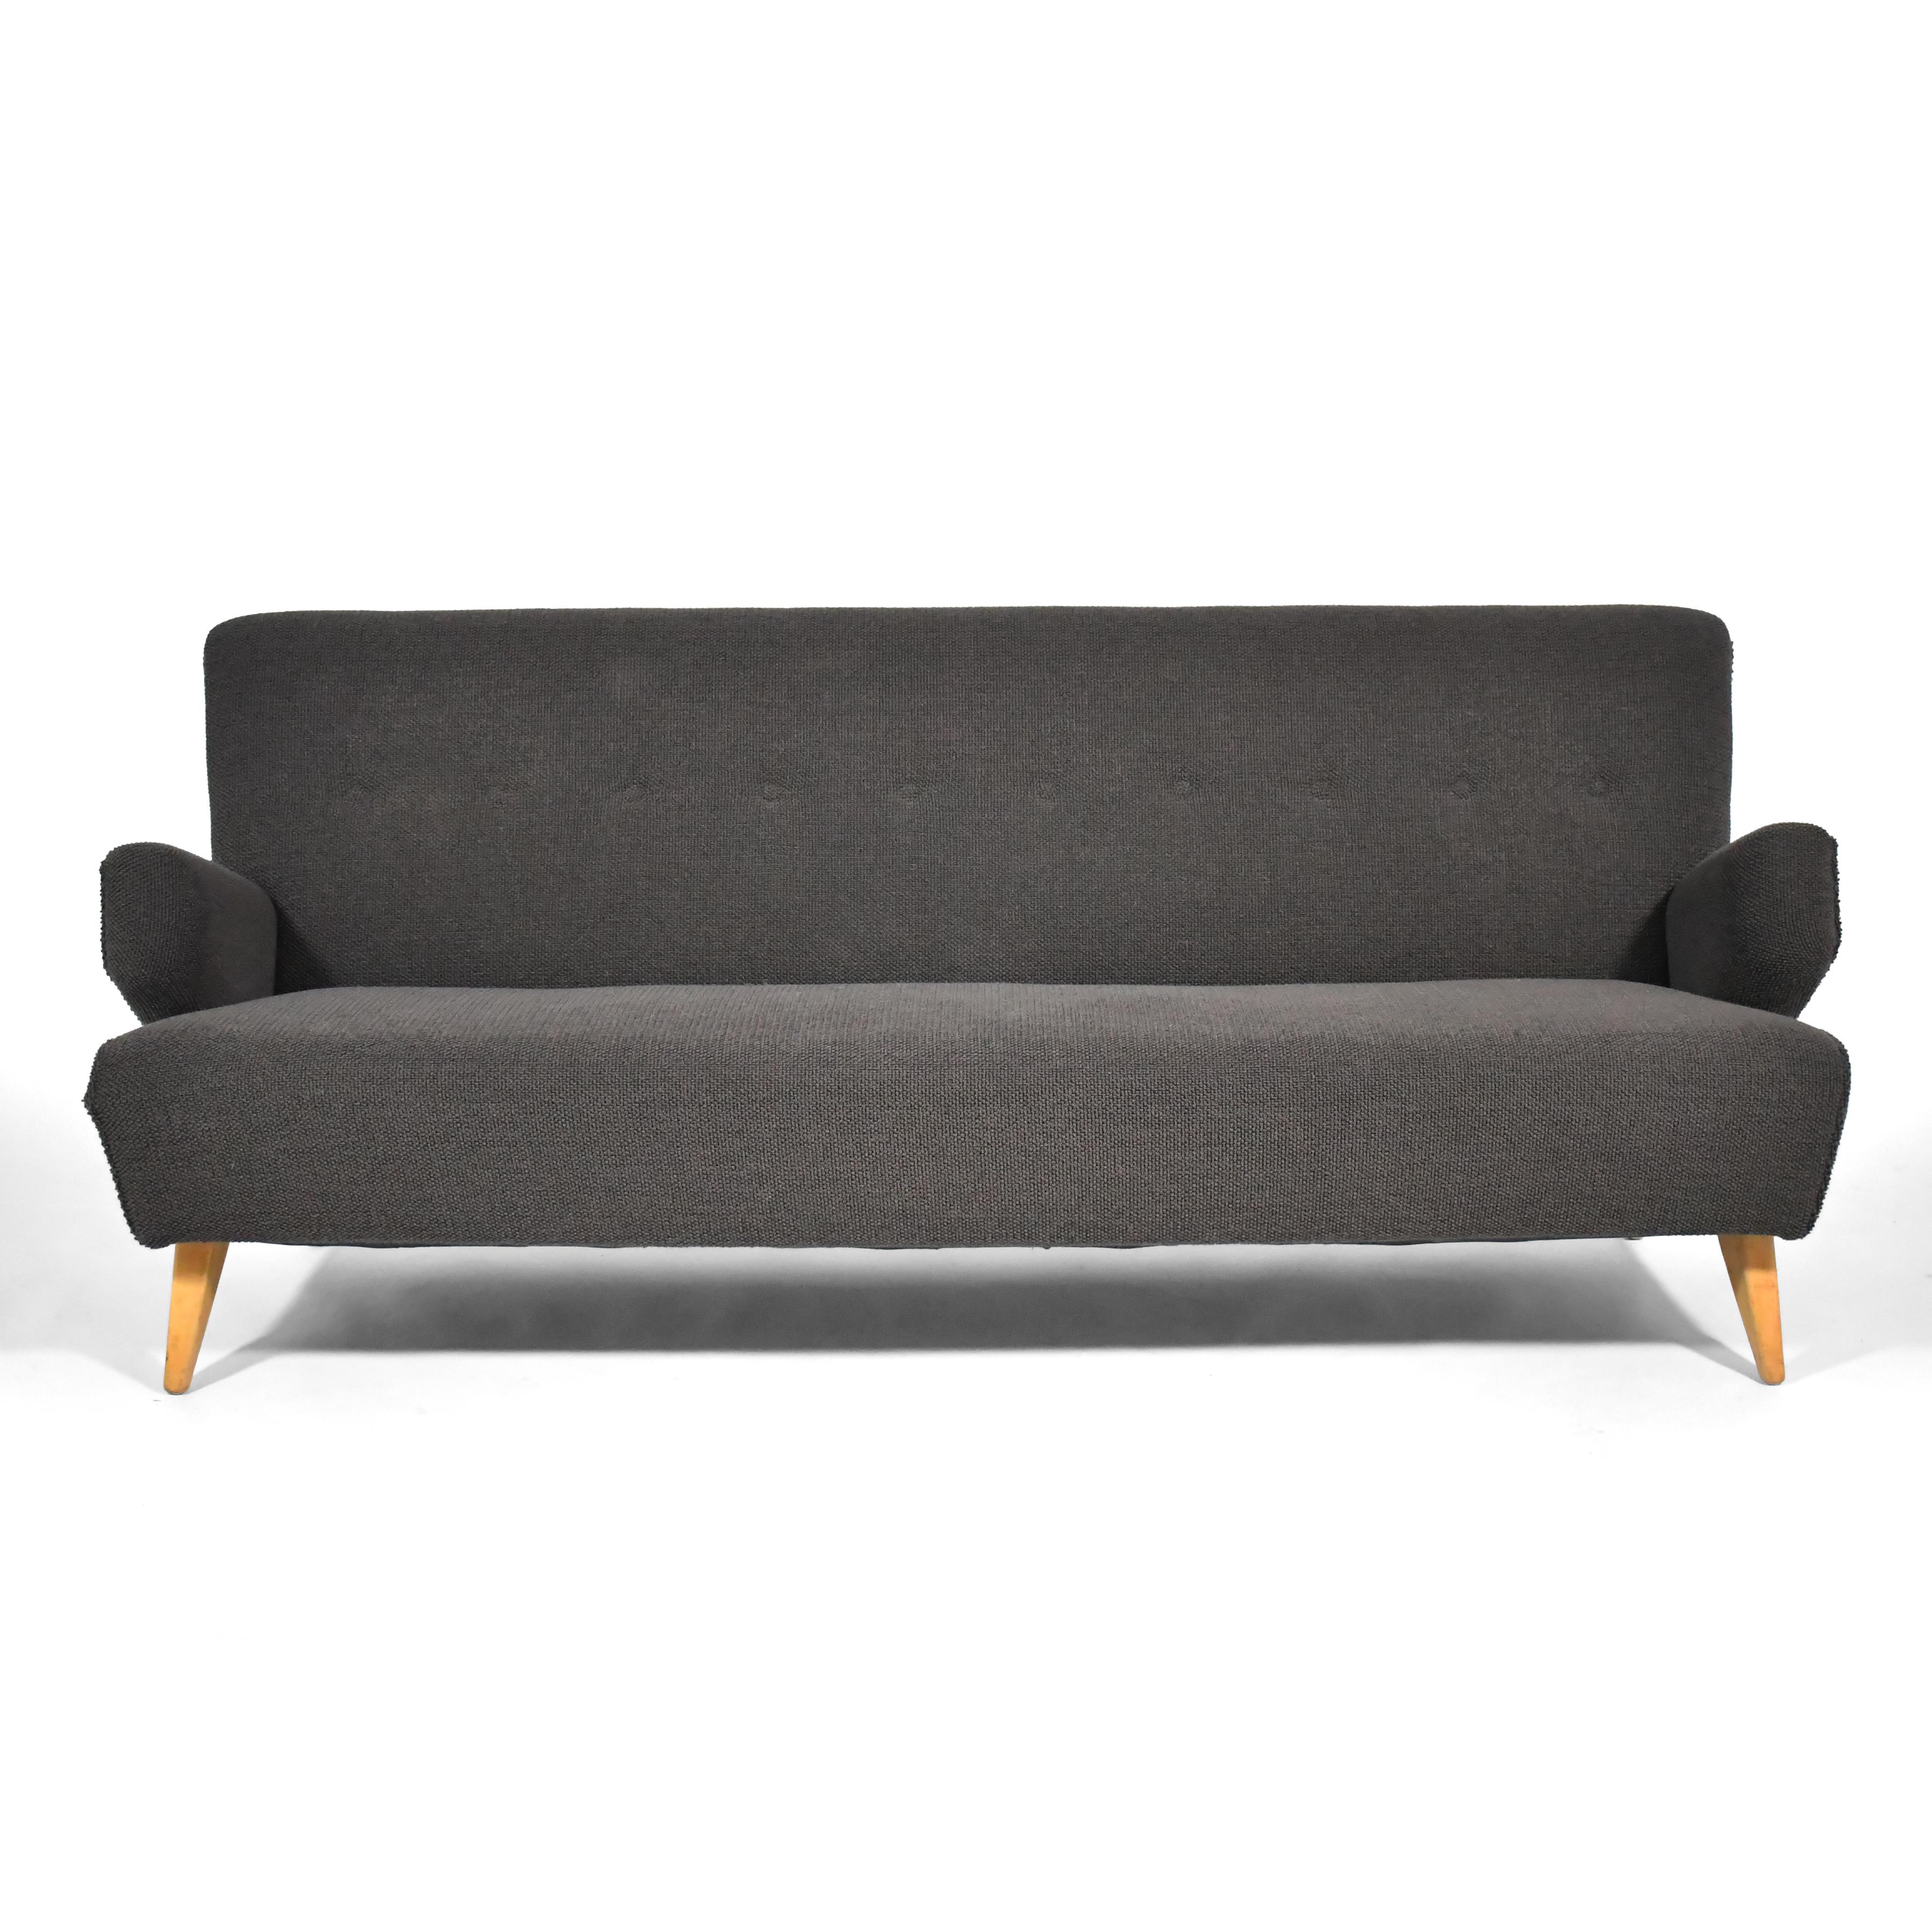 Mid-Century Modern Jens Risom Sofa by Knoll For Sale